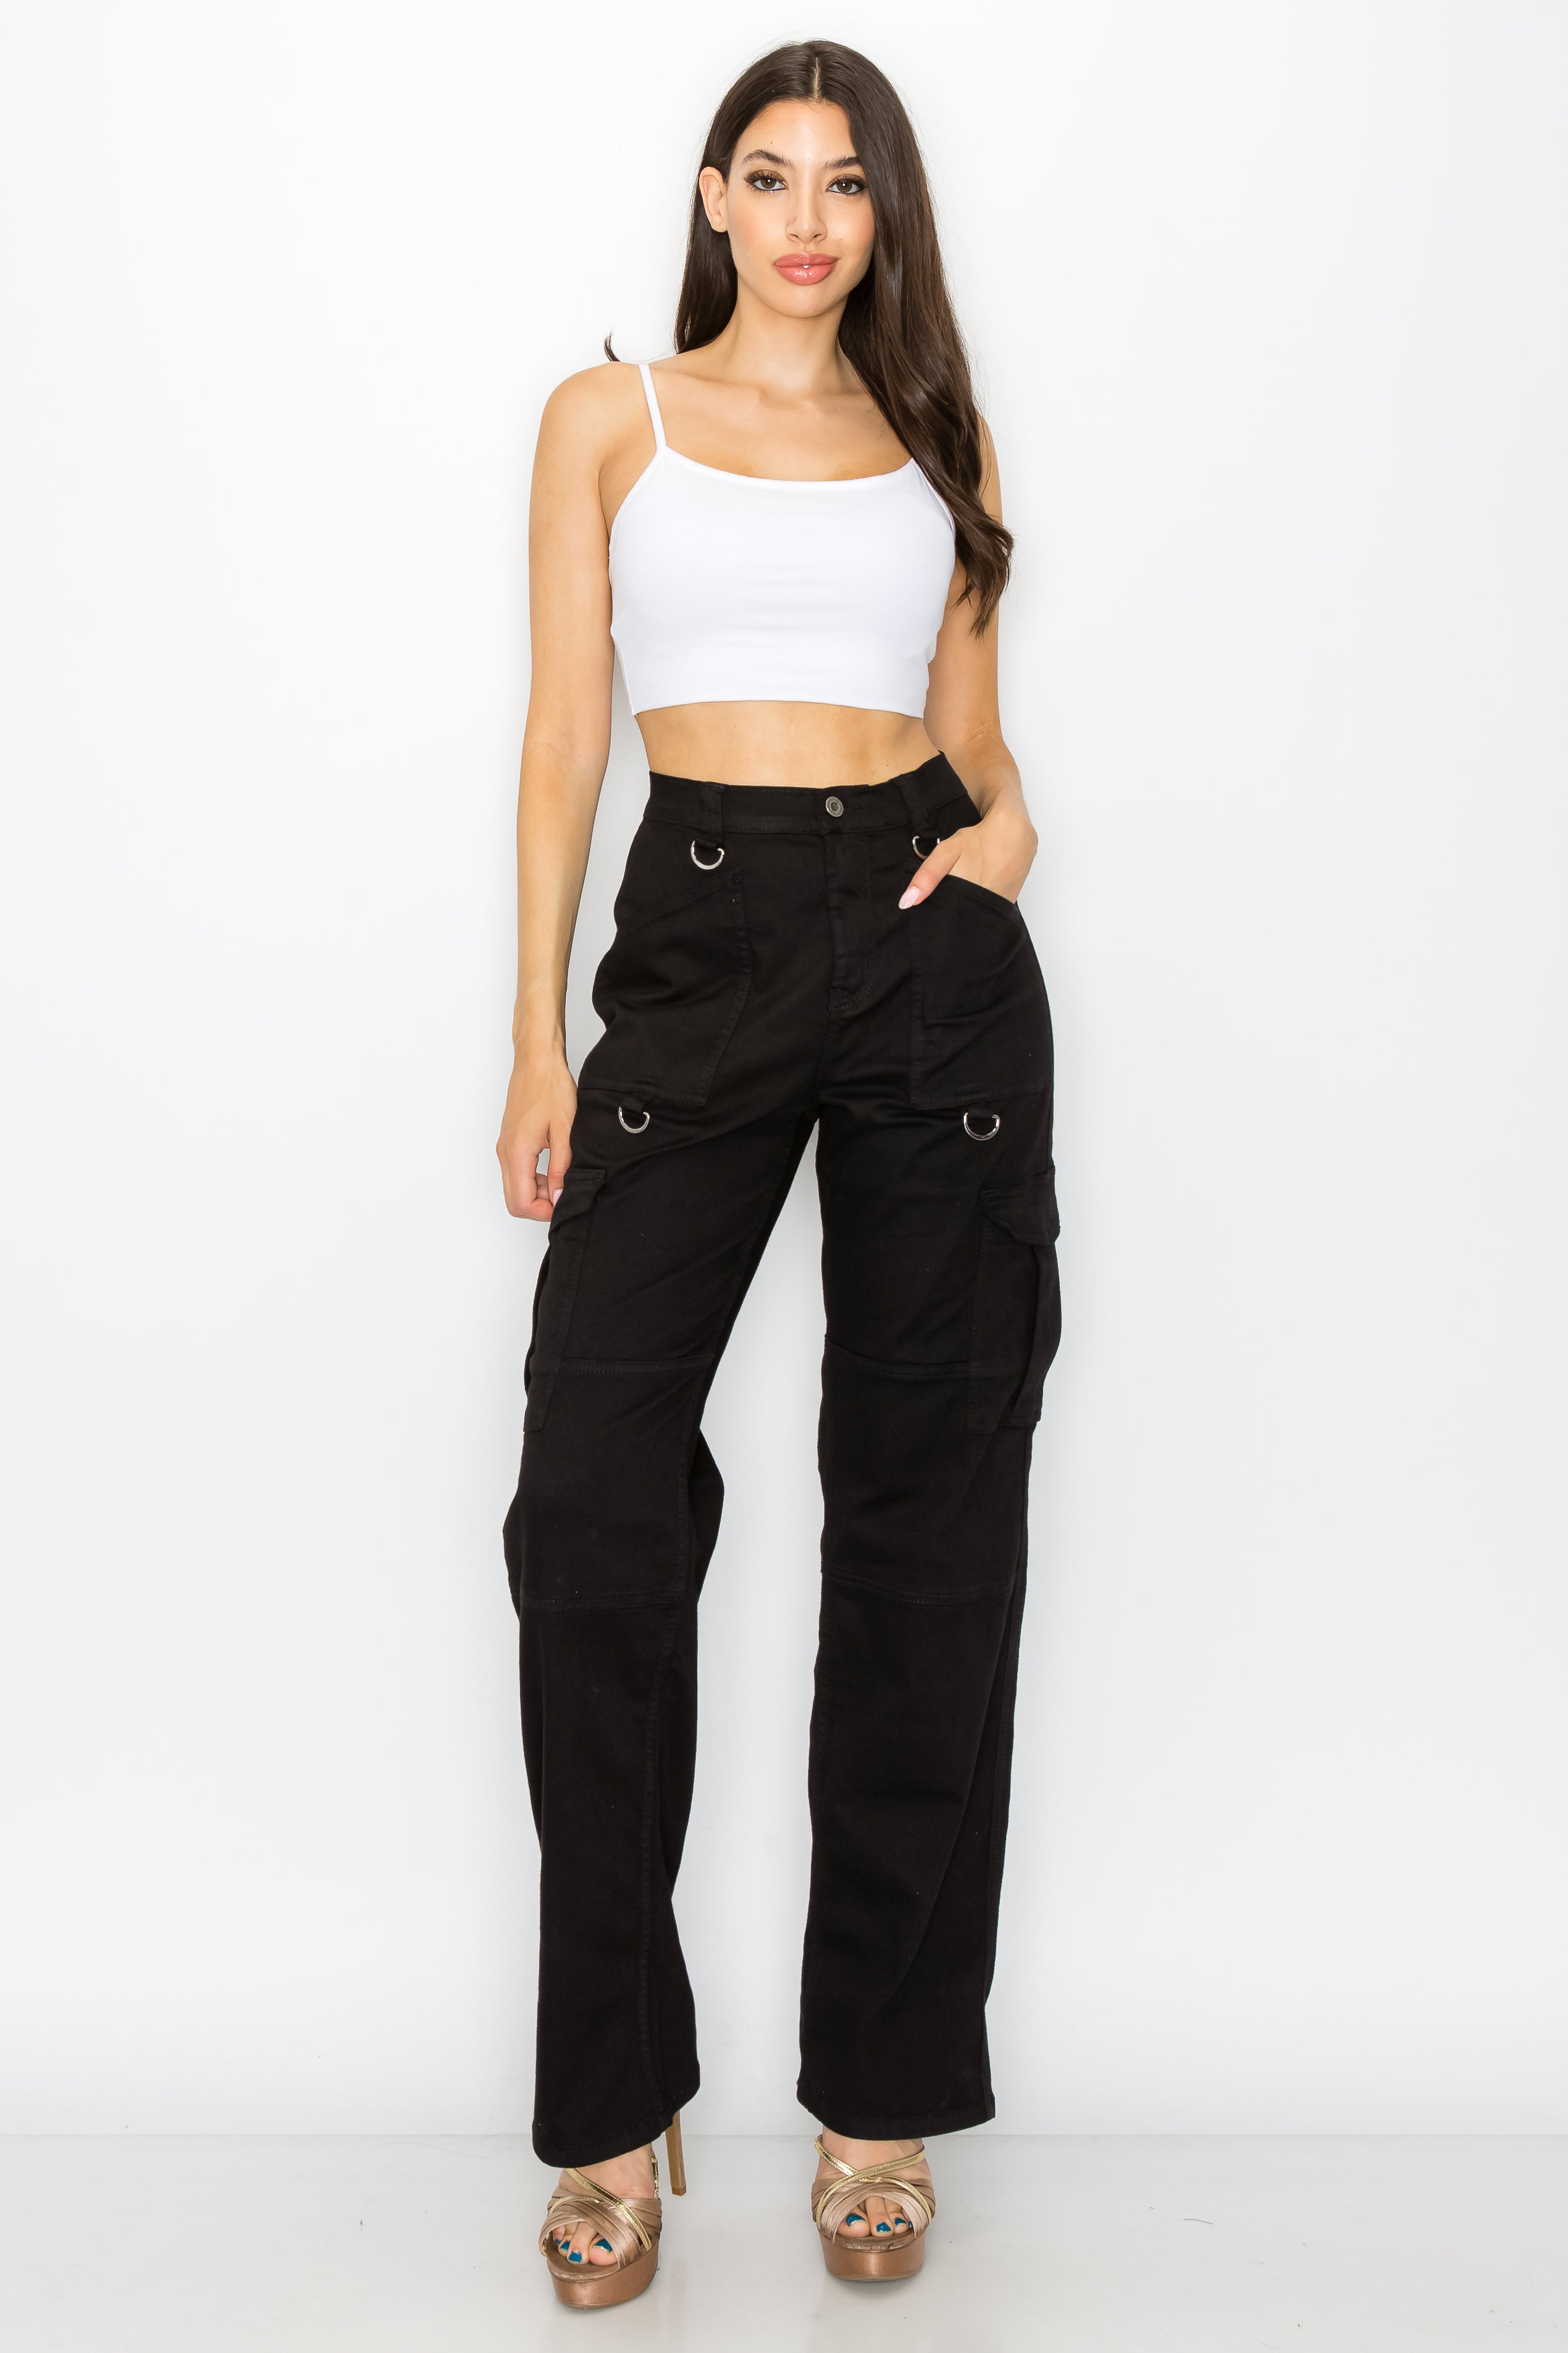 APHT009 Women's High Waisted Black Cargo Pants